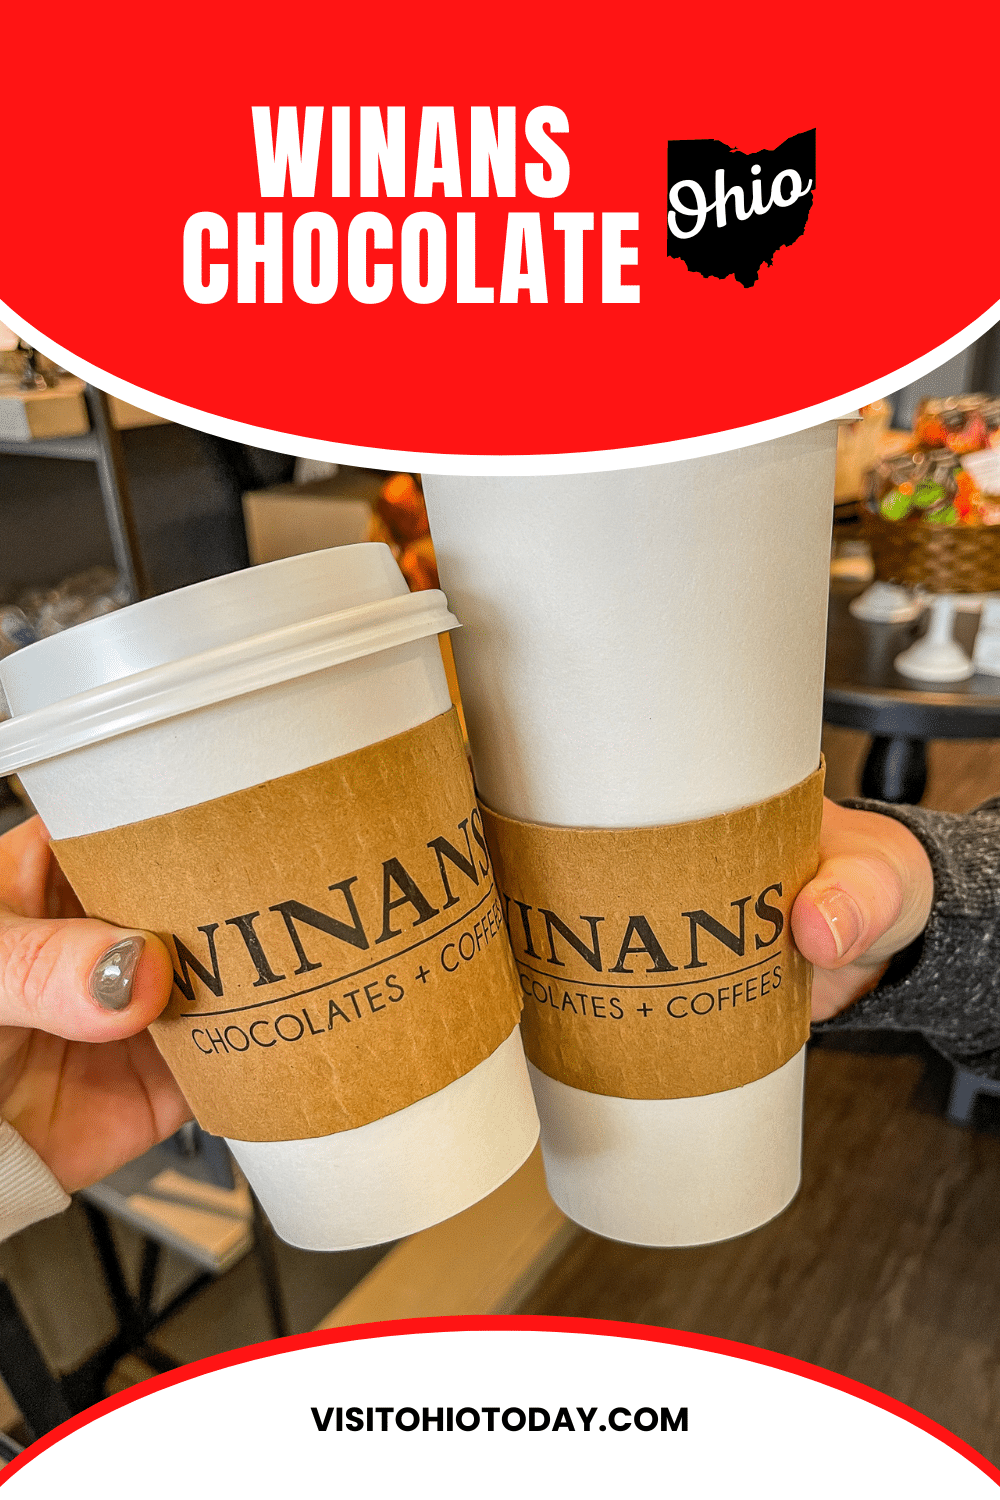 Winans Chocolate is a coffee and chocolate shop known for its delicious, house-roasted coffee and handcrafted chocolates, found in many locations throughout Ohio.